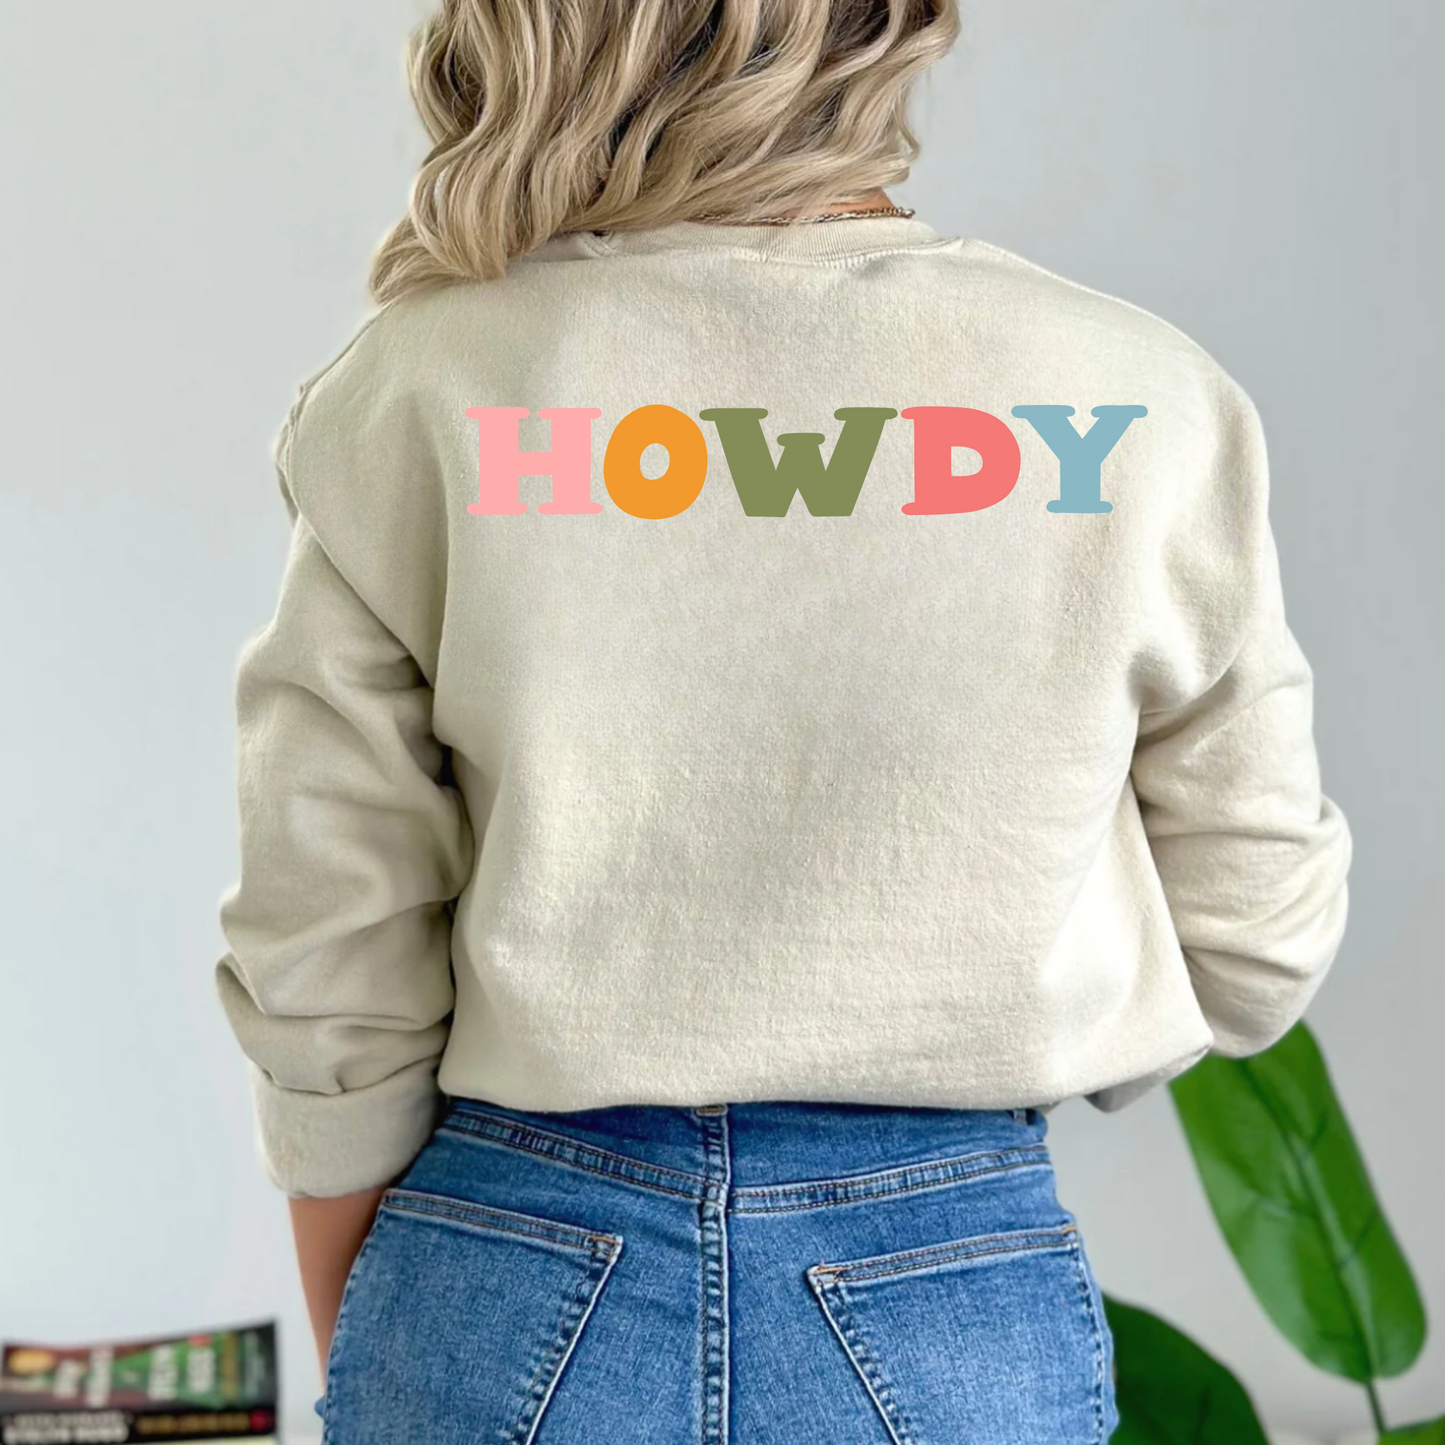 (shirt not included) HOWDY in multicolor - Matte Clear Film Transfer